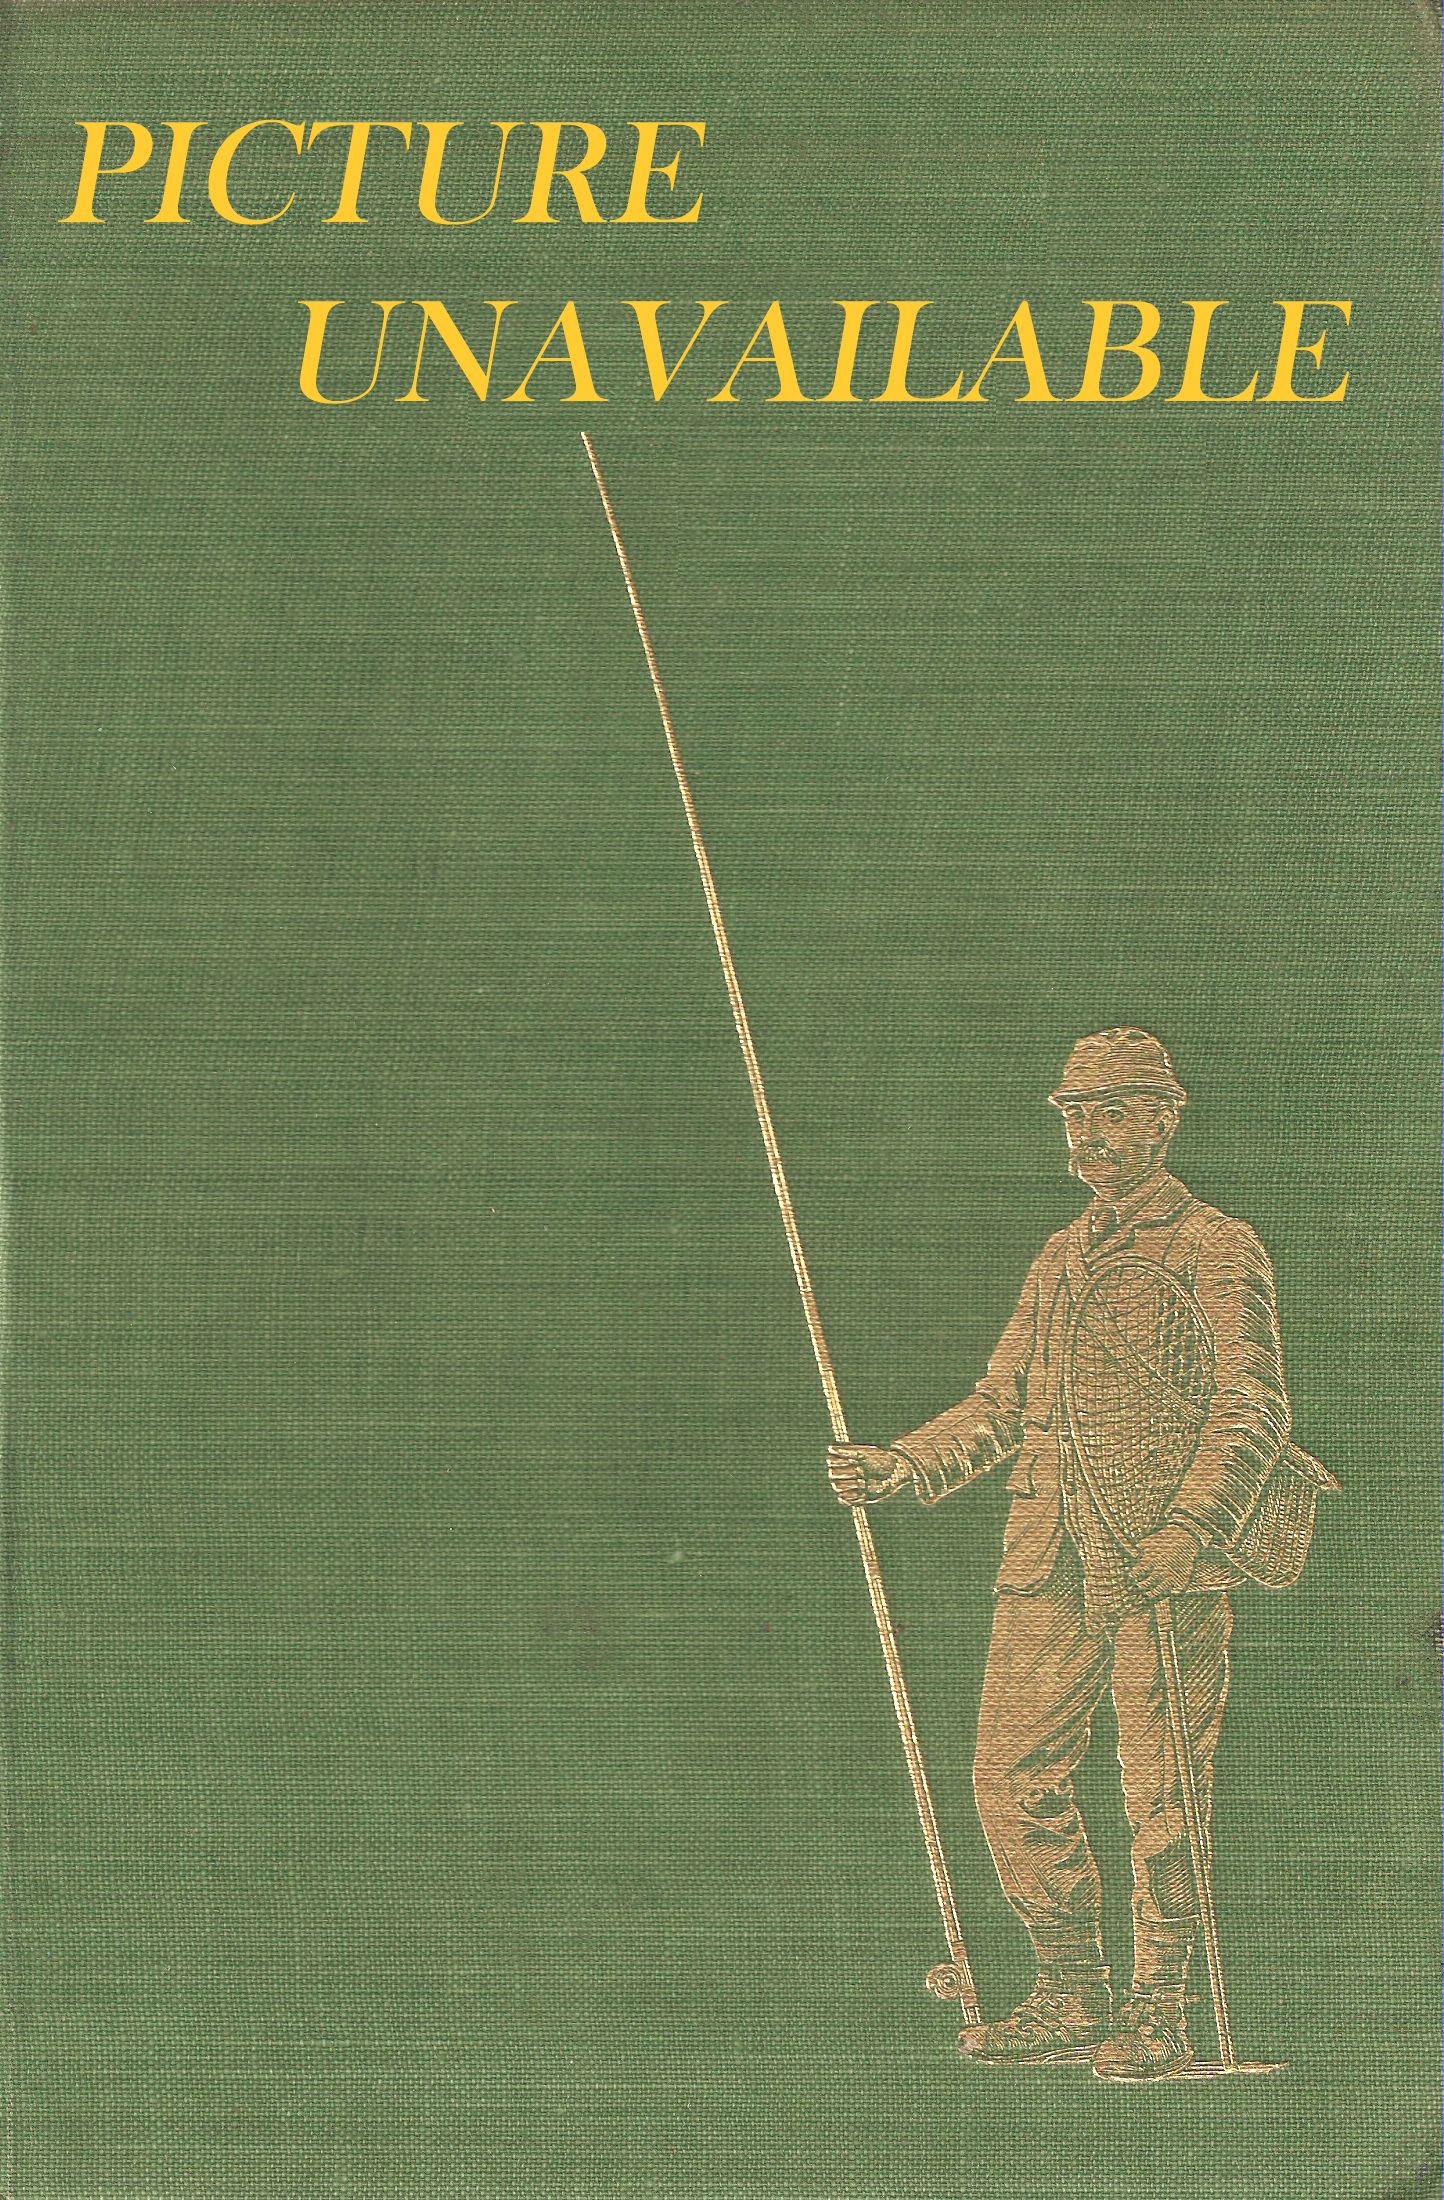 CREEL: A FISHING MAGAZINE. Volume 4, number 11. May 1967.